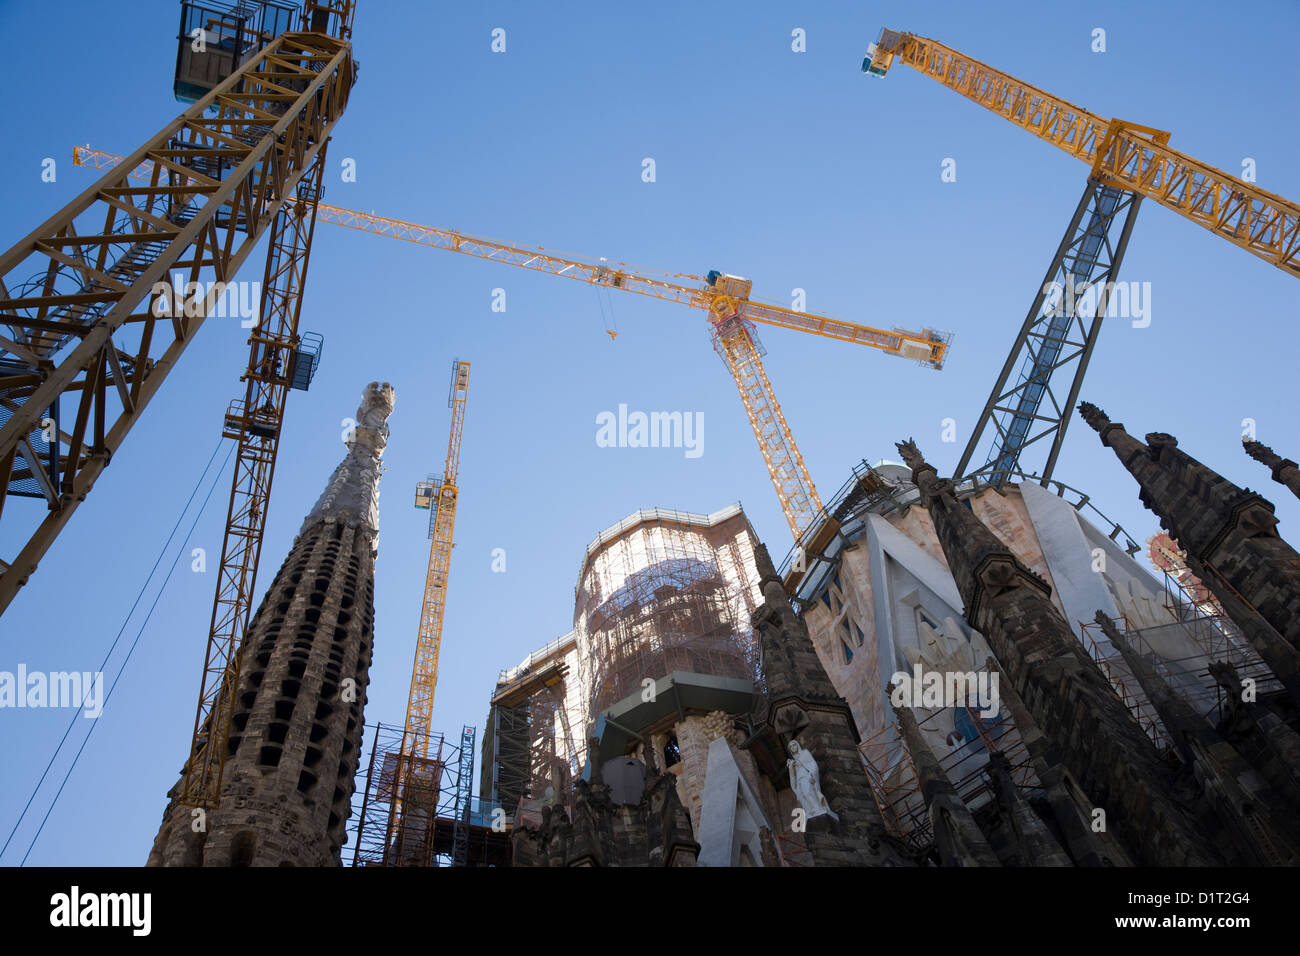 Cranes and construction workers outside the Sagrada Familia in Barcelona, Spain Stock Photo